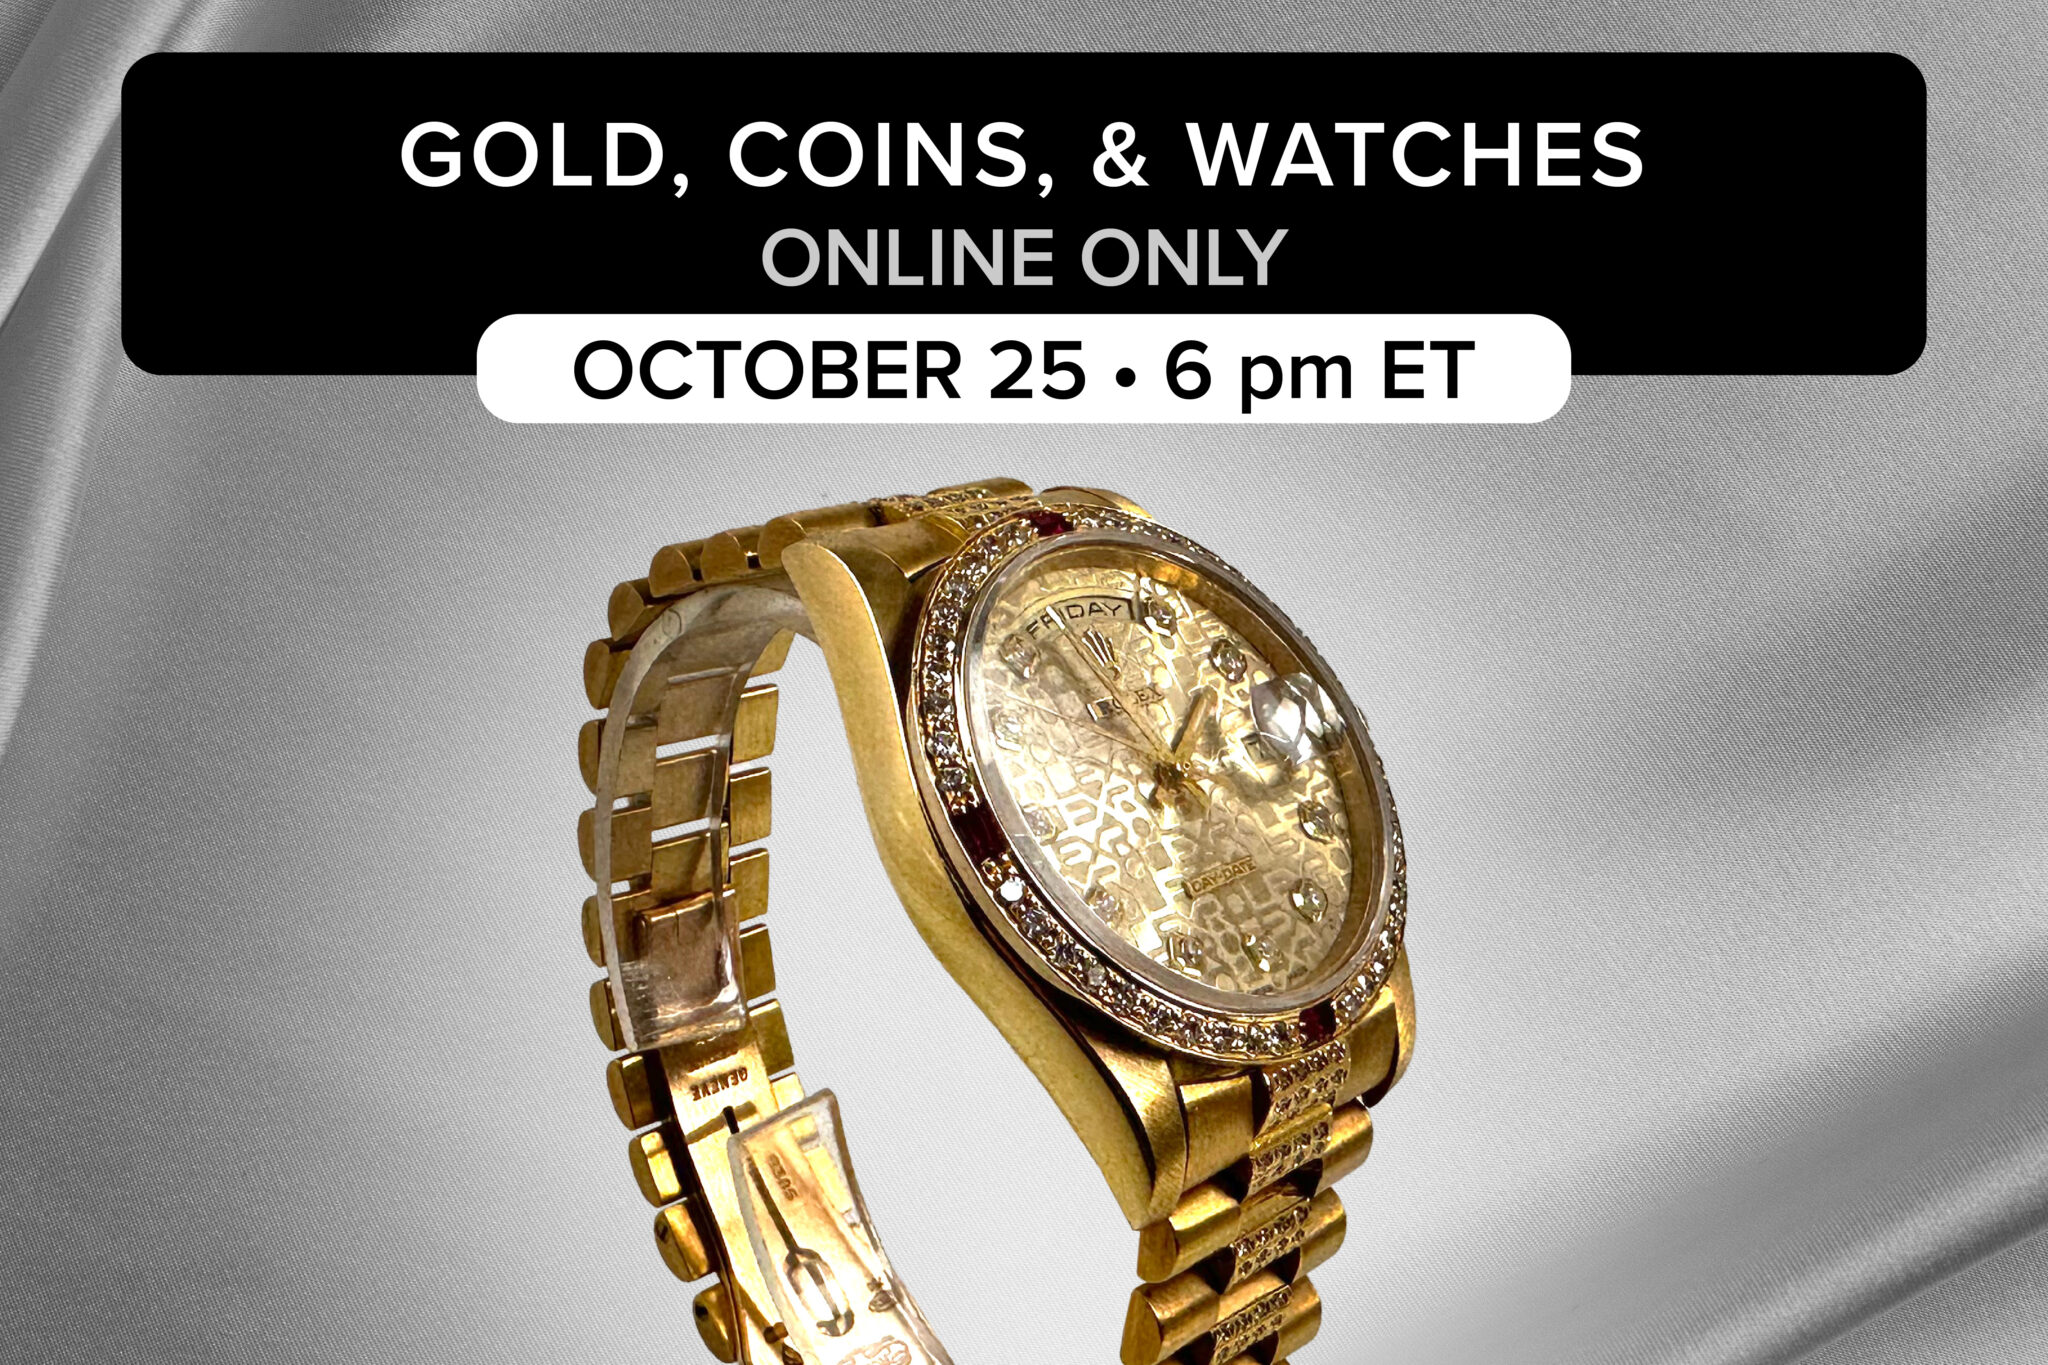 Gold, Coins, & Watches | October 25